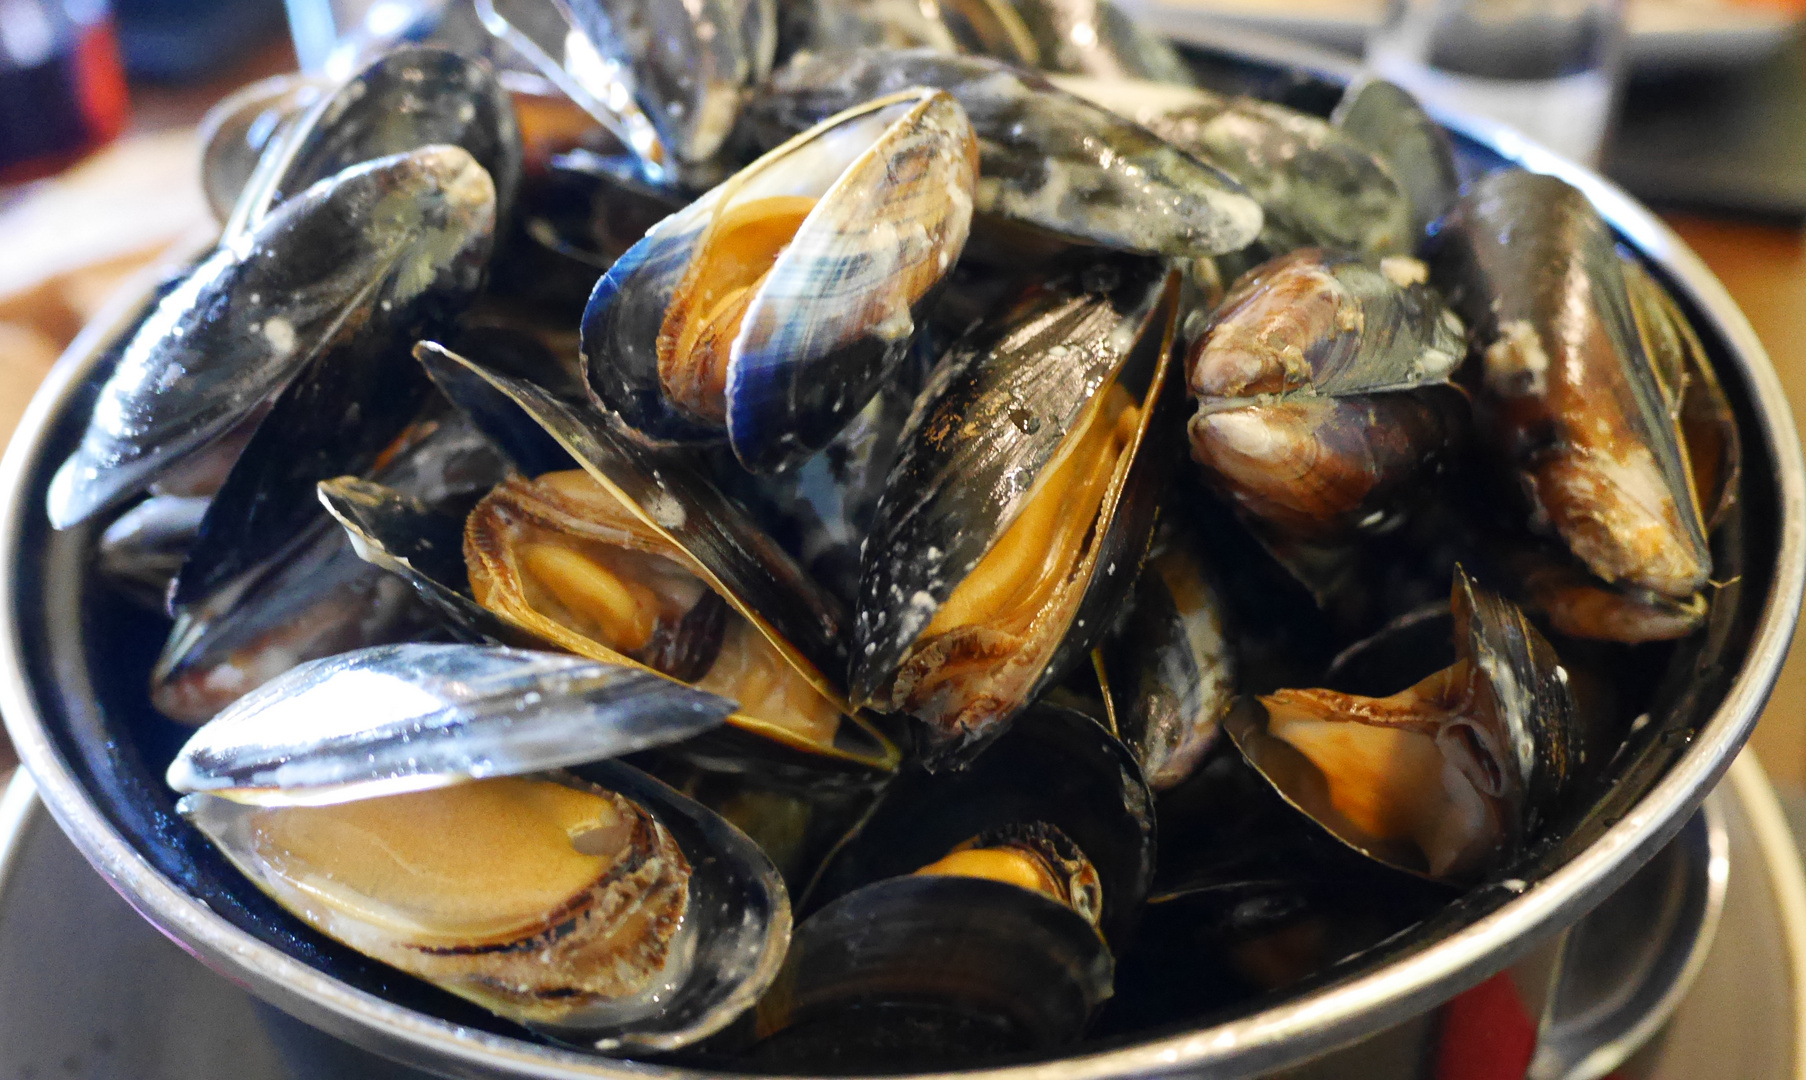 simple pub, perfect mussels